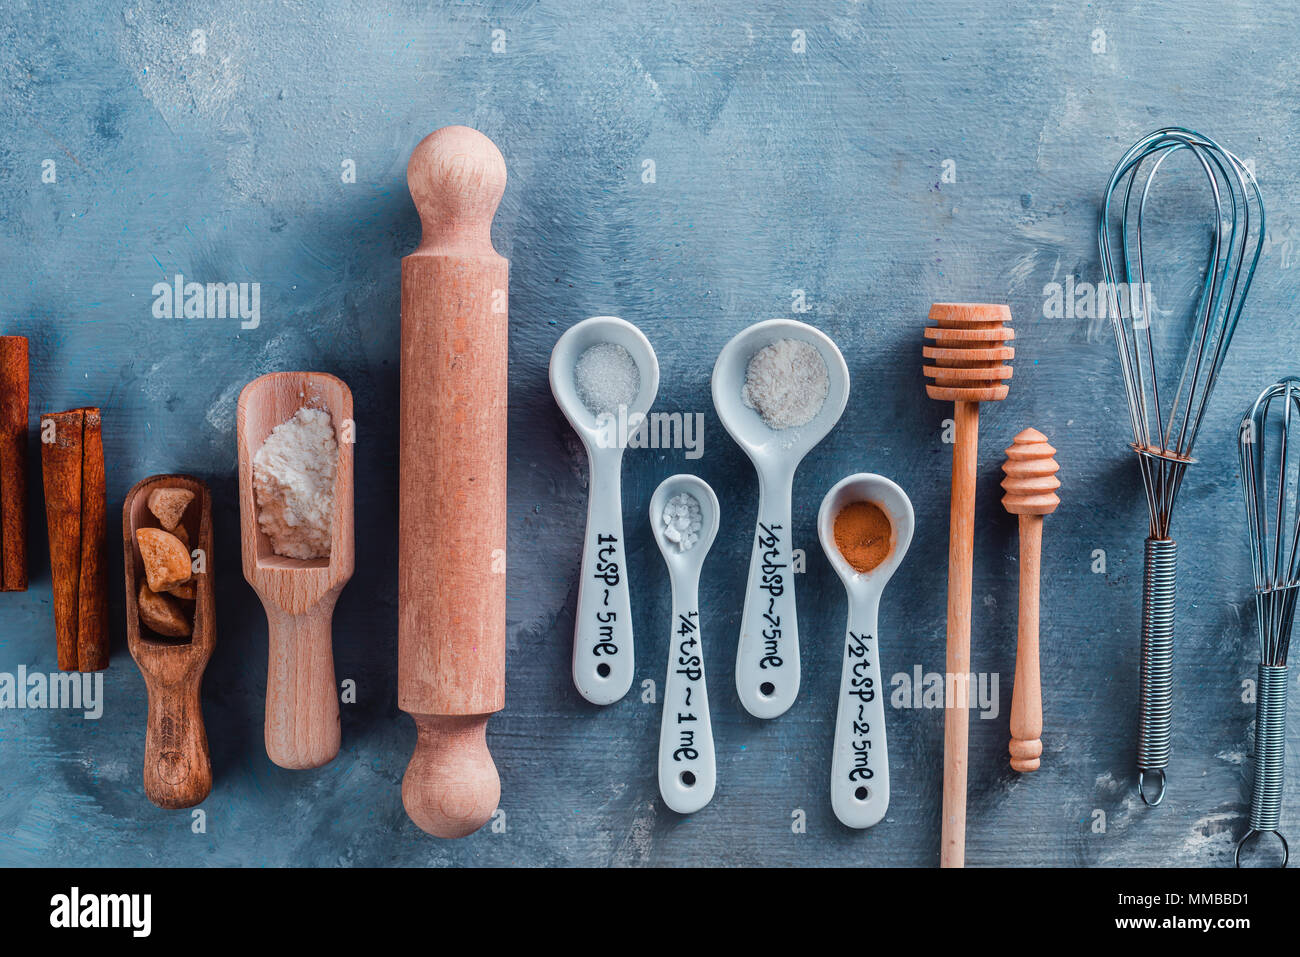 https://c8.alamy.com/comp/MMBBD1/kitchen-utensils-for-baking-rolling-pin-and-measuring-spoons-on-a-blue-table-with-copy-space-cooking-pastry-concept-MMBBD1.jpg